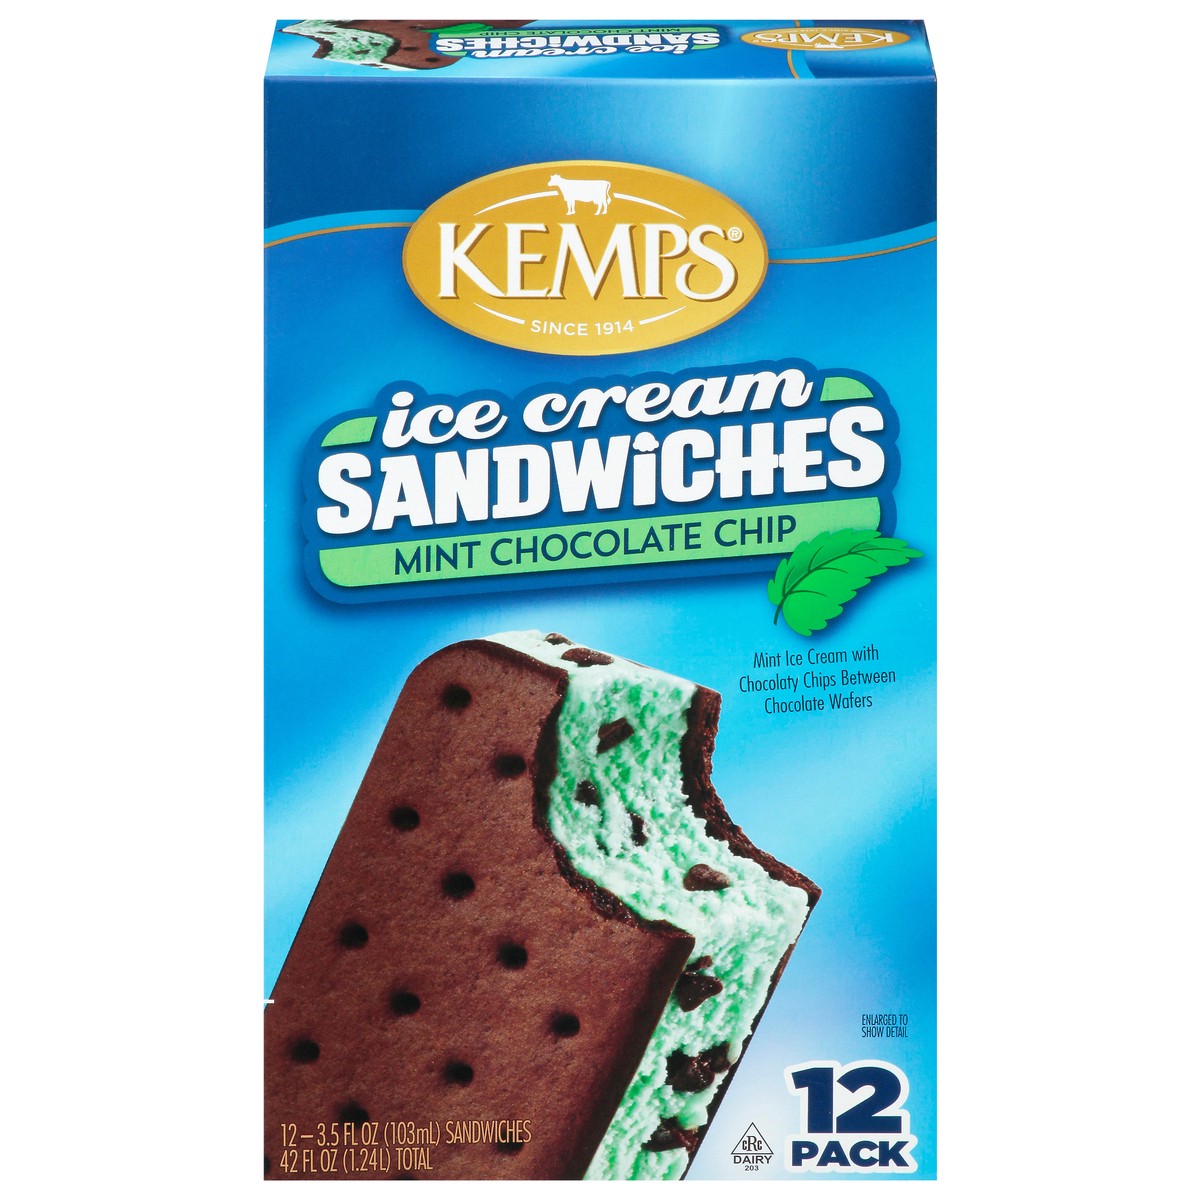 slide 1 of 14, Kemps Mint Chocolate Chip Ice Cream Sandwiches, 12 ct